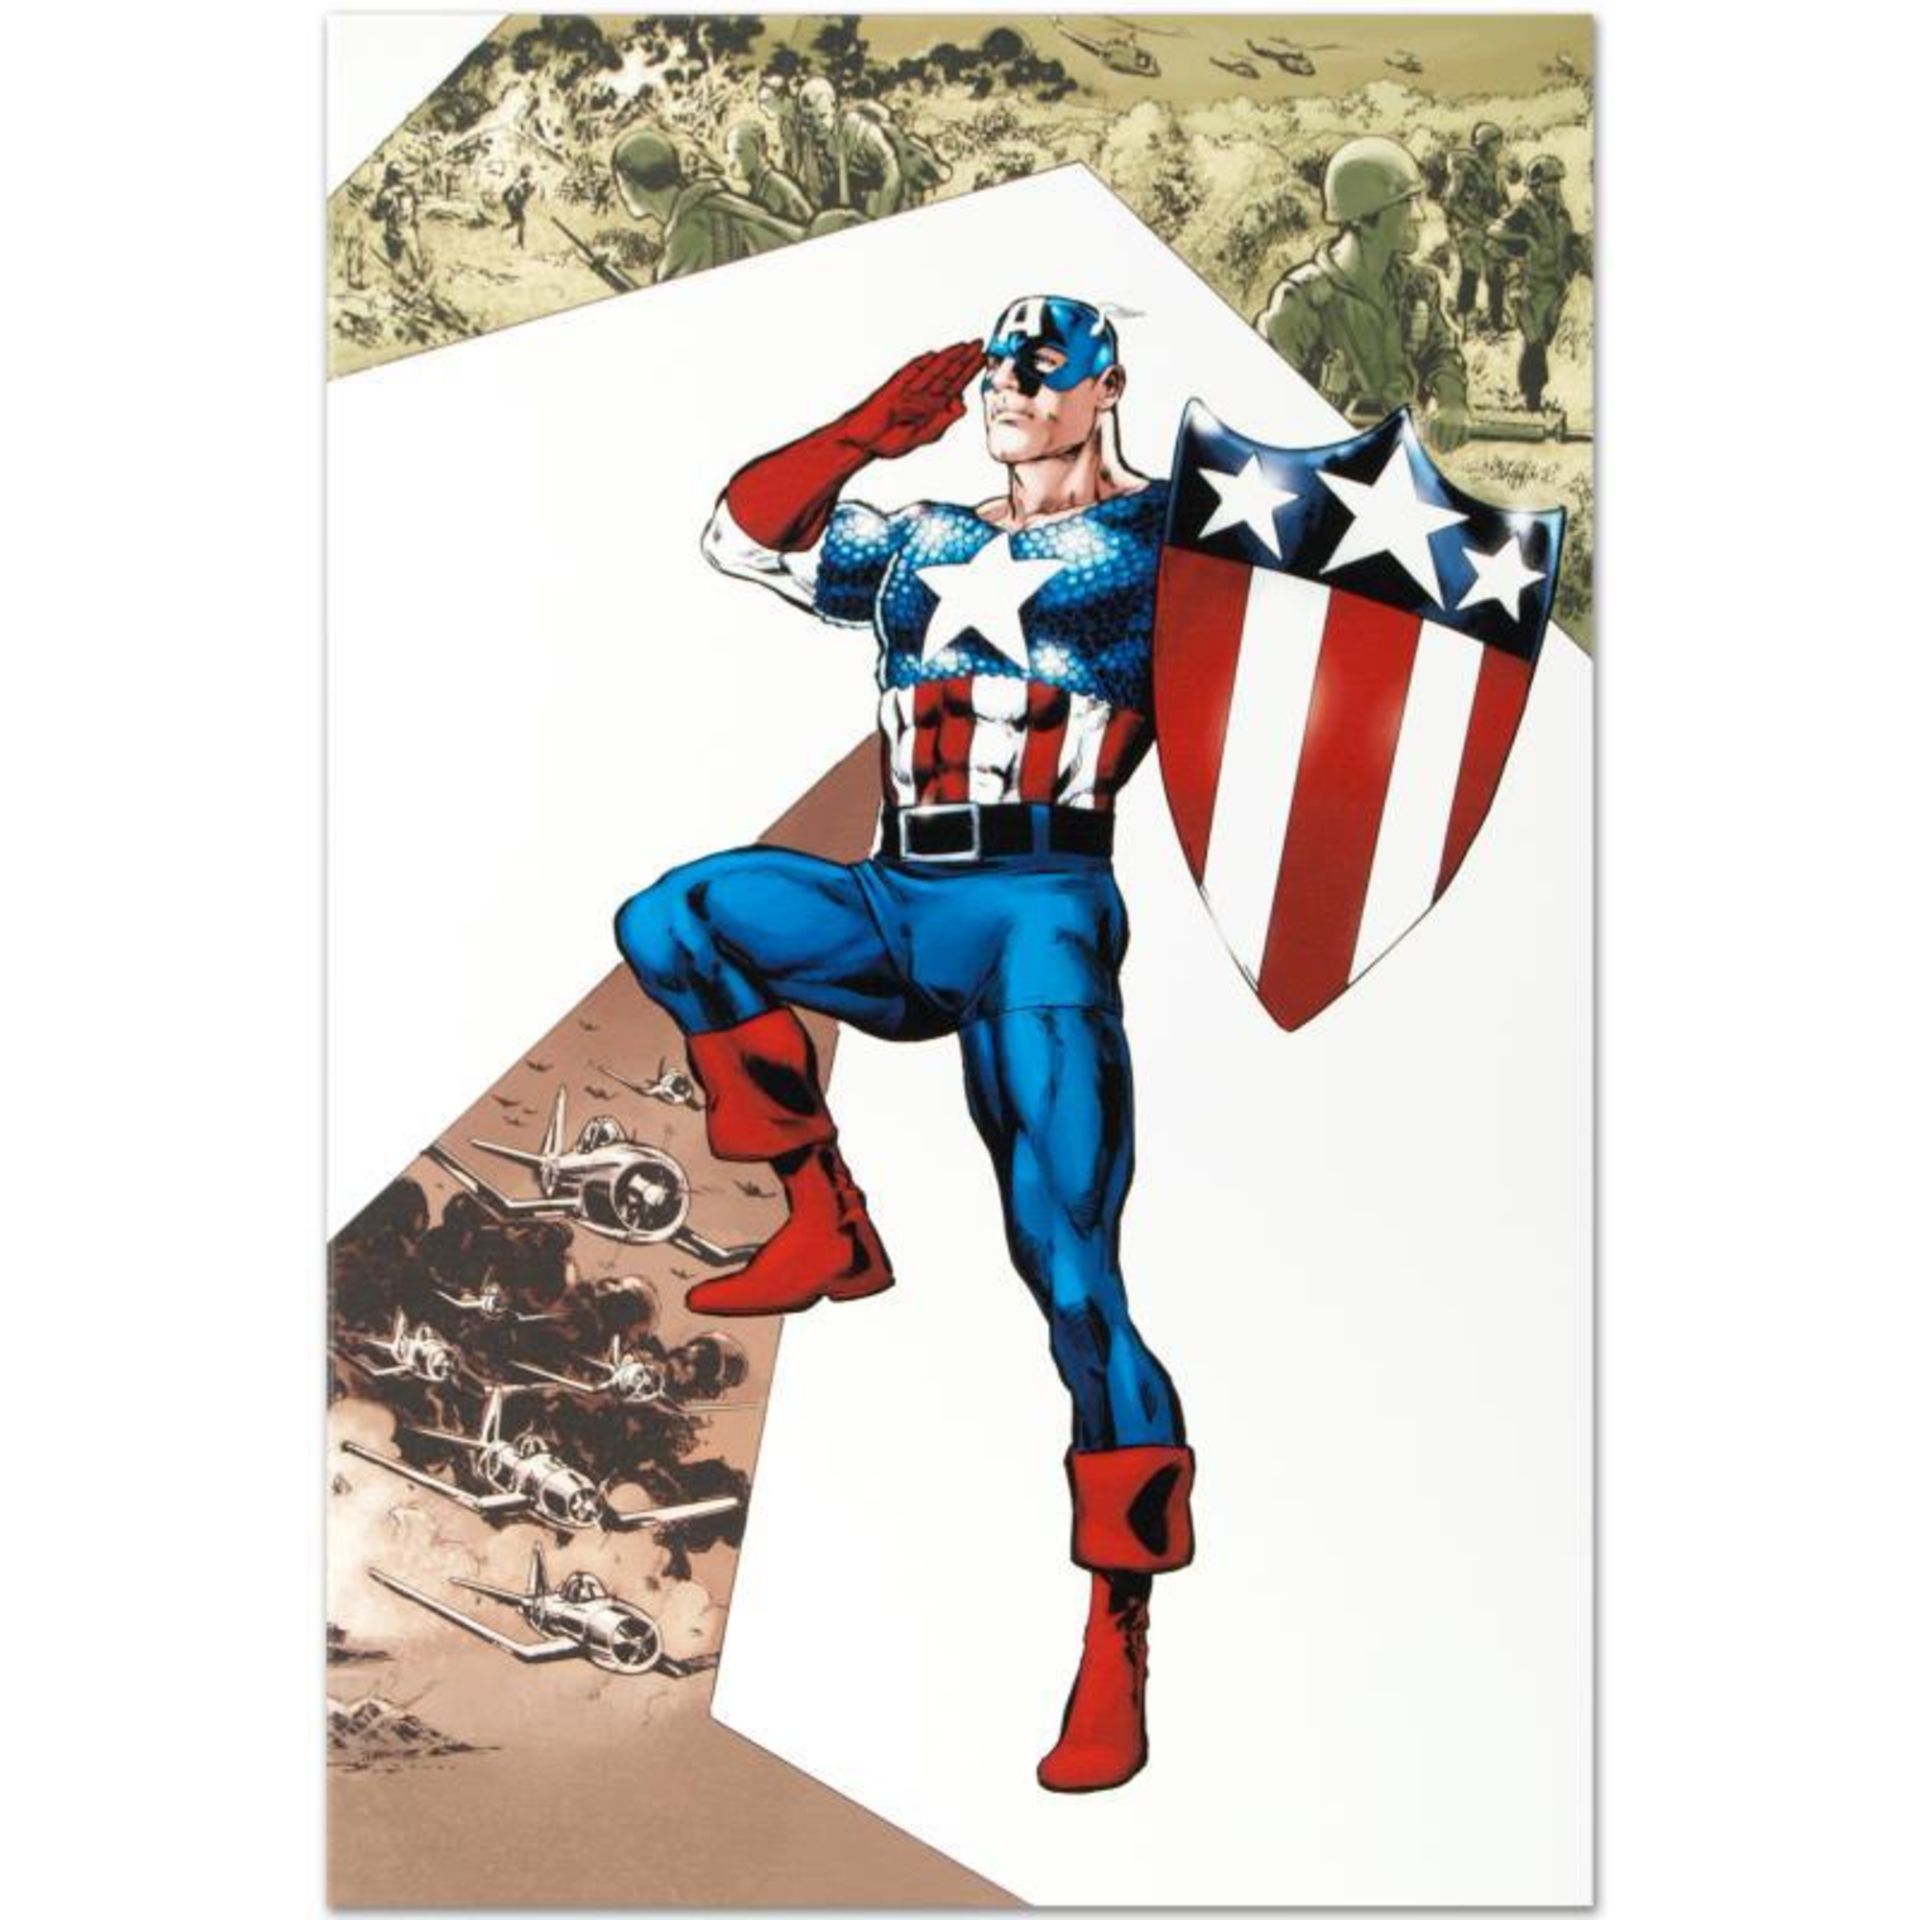 Marvel Comics "Captain America Corps #2" Numbered Limited Edition Giclee on Canv